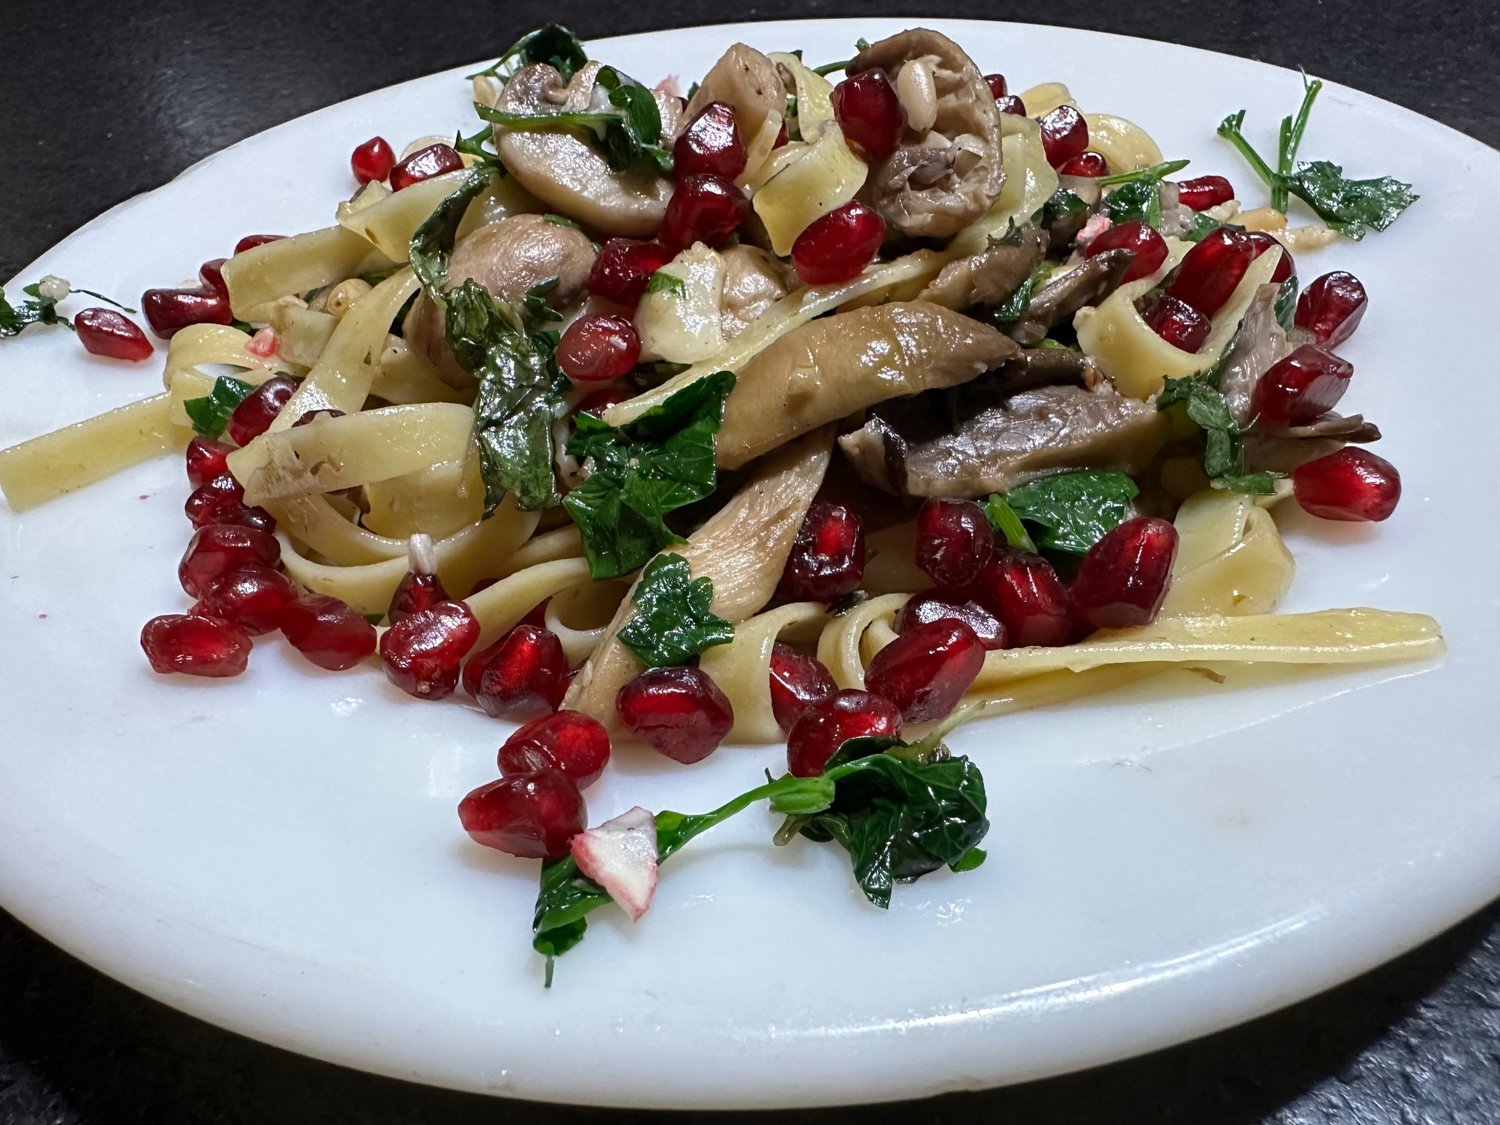 Linguine con funghi e formaggio (in English: linguini with mushrooms and cheese) is amplified by the addition of sweet, tart pomegranate seeds.